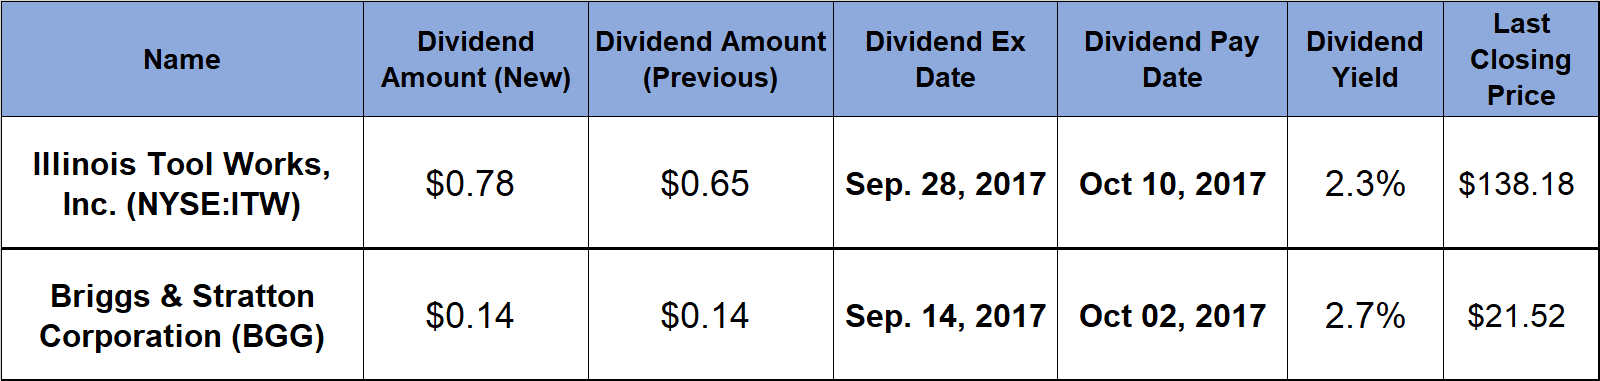 Dividend Yields